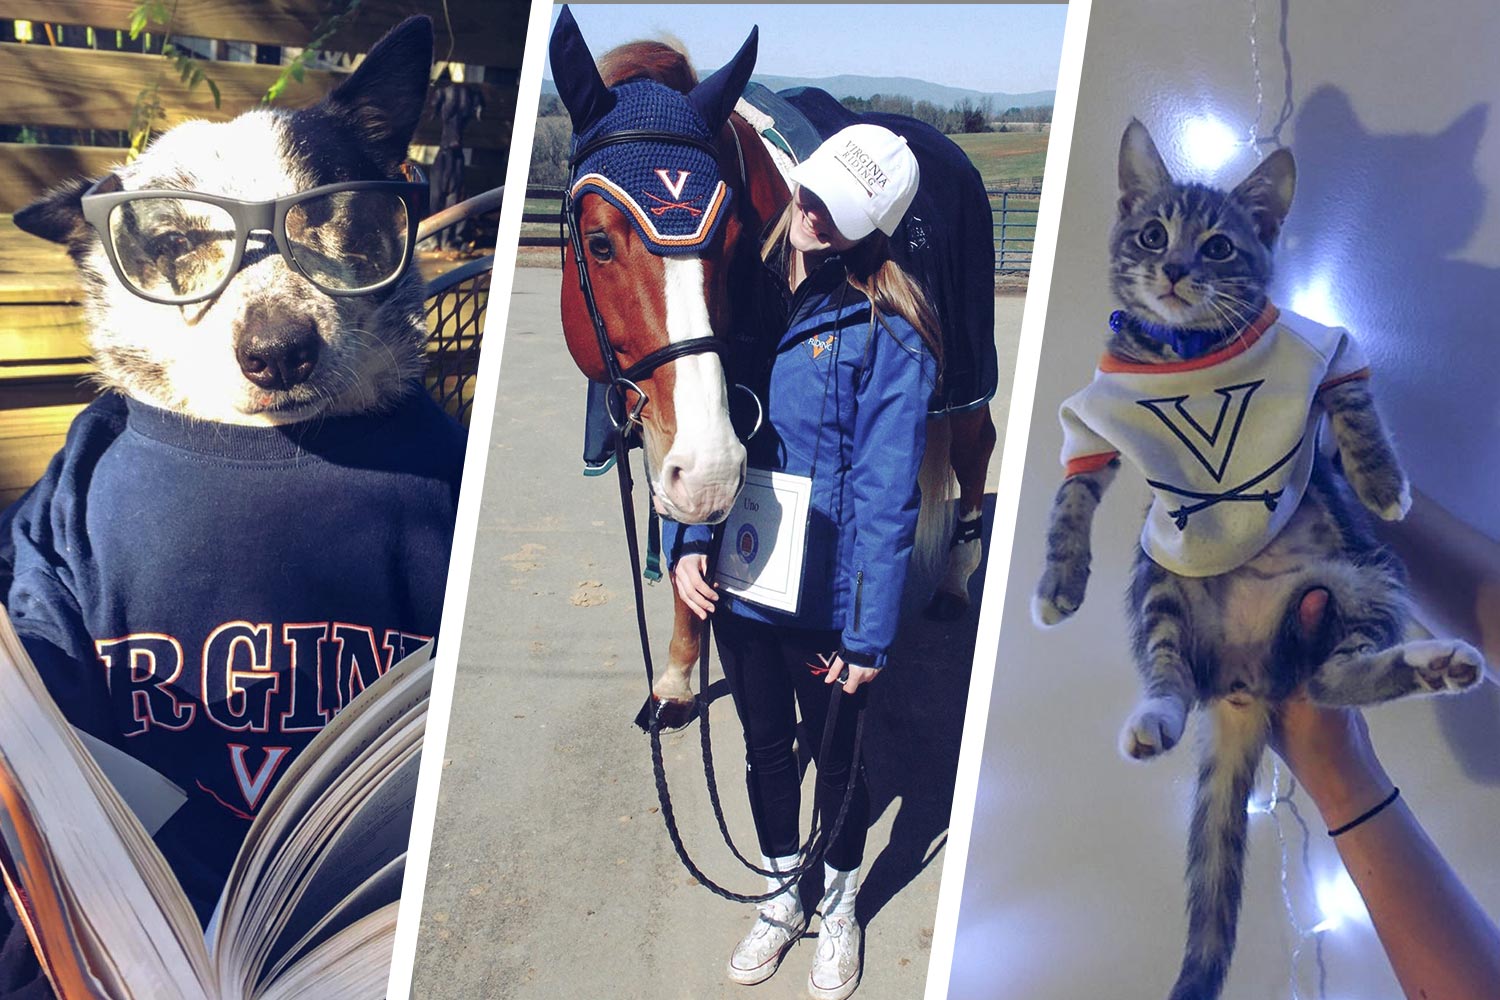 Left: dog wearing glasses reading a book in a uva sweatshirt.  Middle:  Horse wearing a crocheted UVA hat Right: Cat in a small uva sweatshirtPets